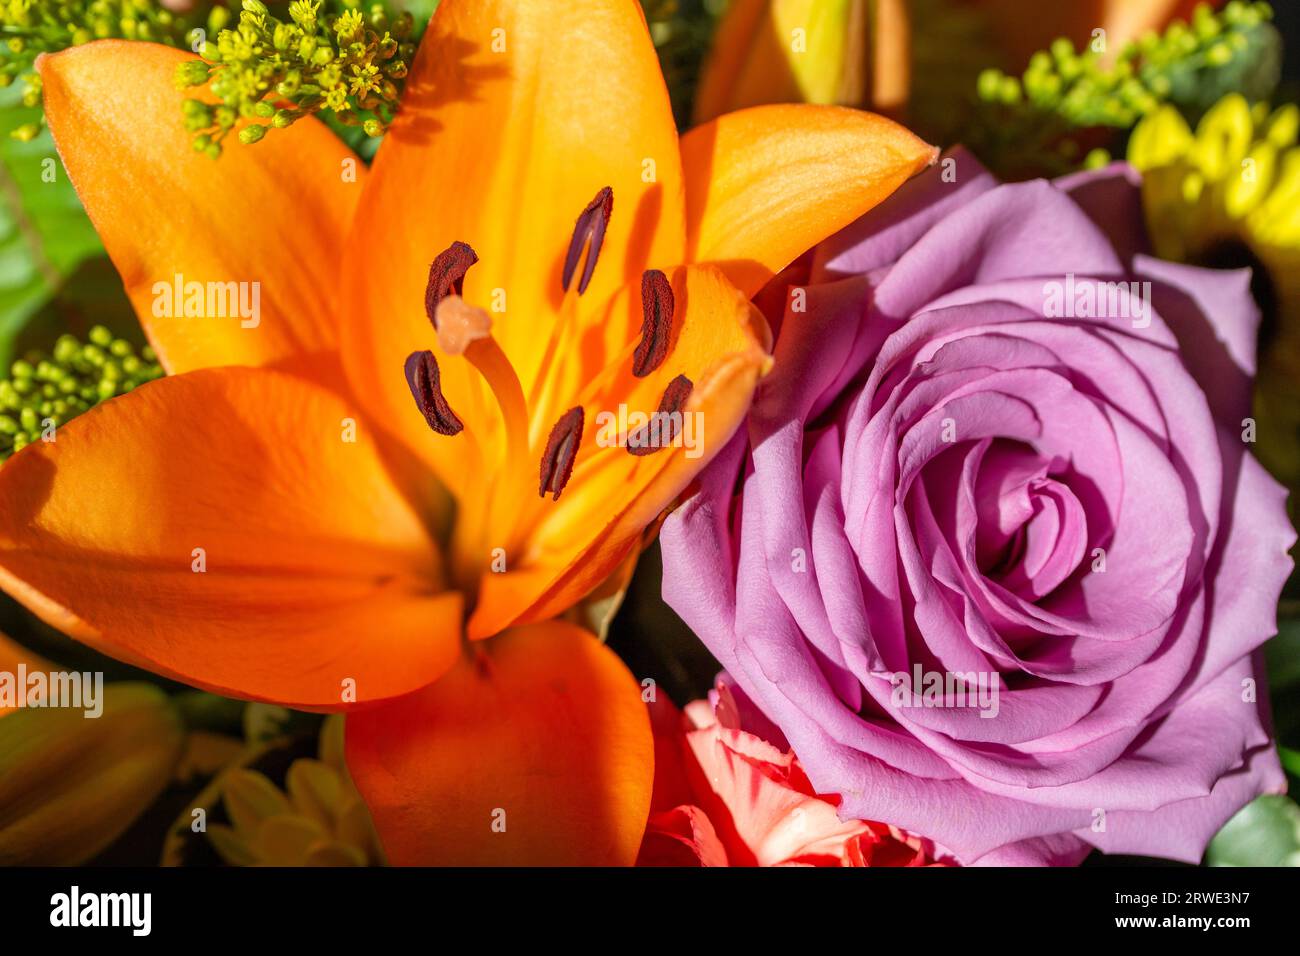 Macro texture background of fresh bright flowers in an indoor florist arrangement, featuring an orange lily Stock Photo